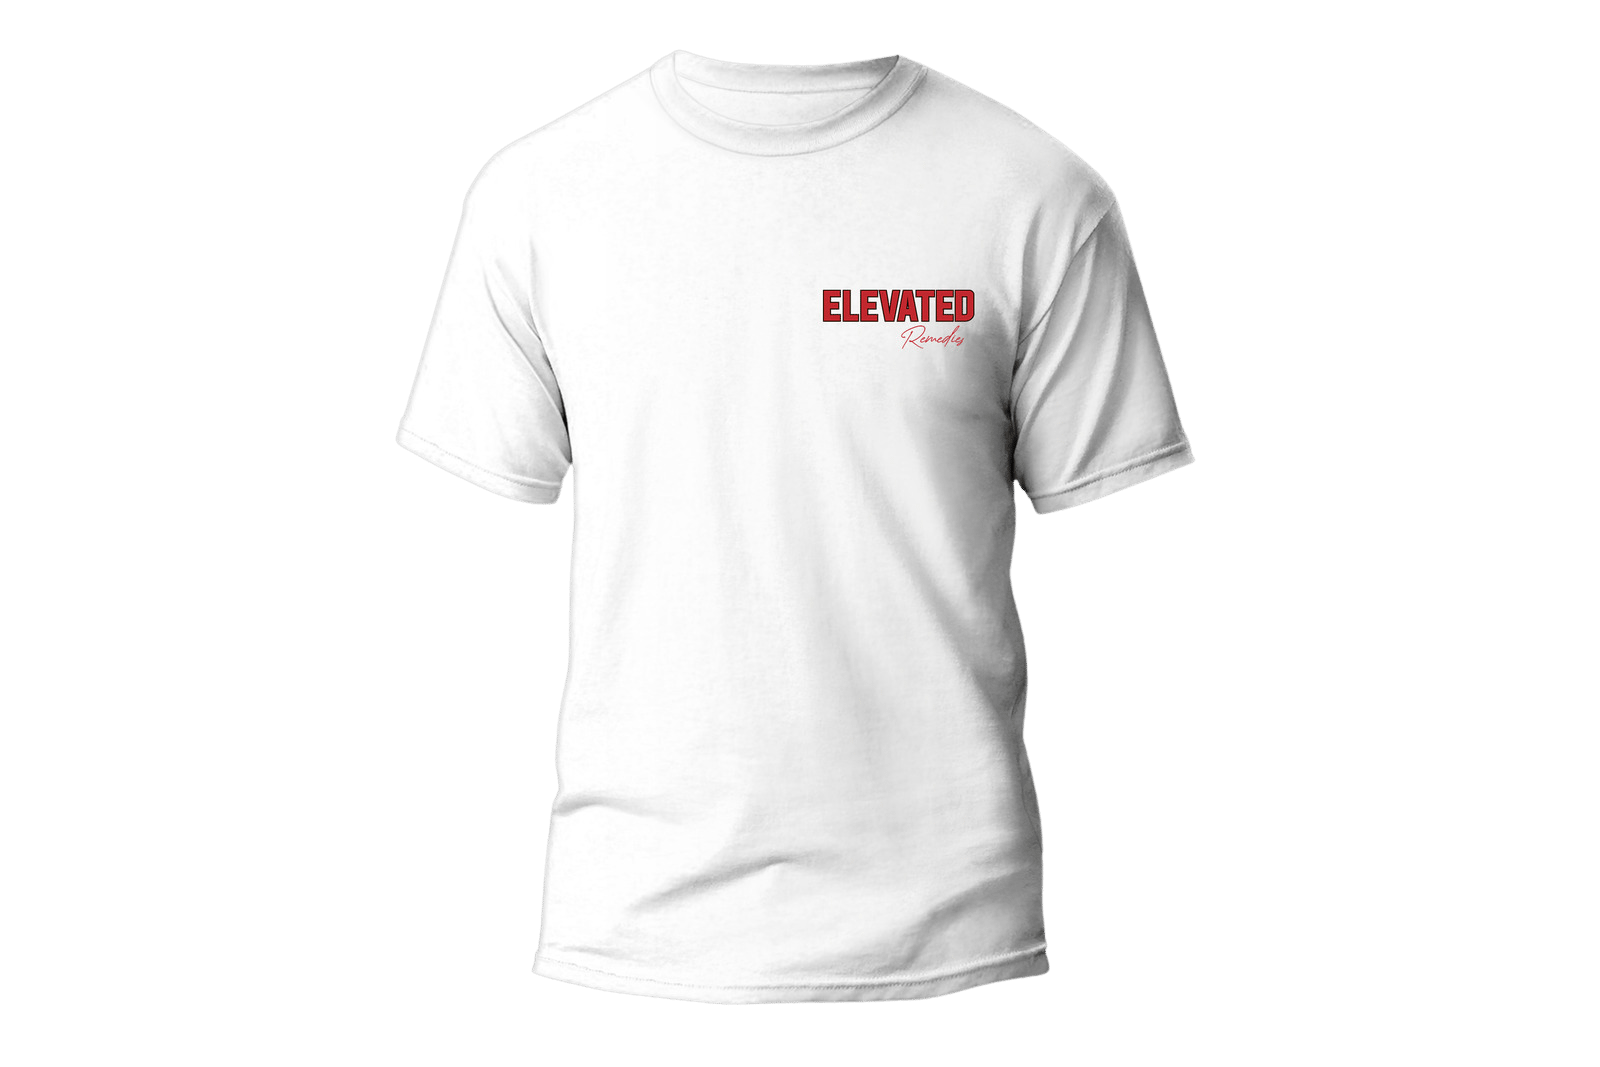 Elevated T-shirt